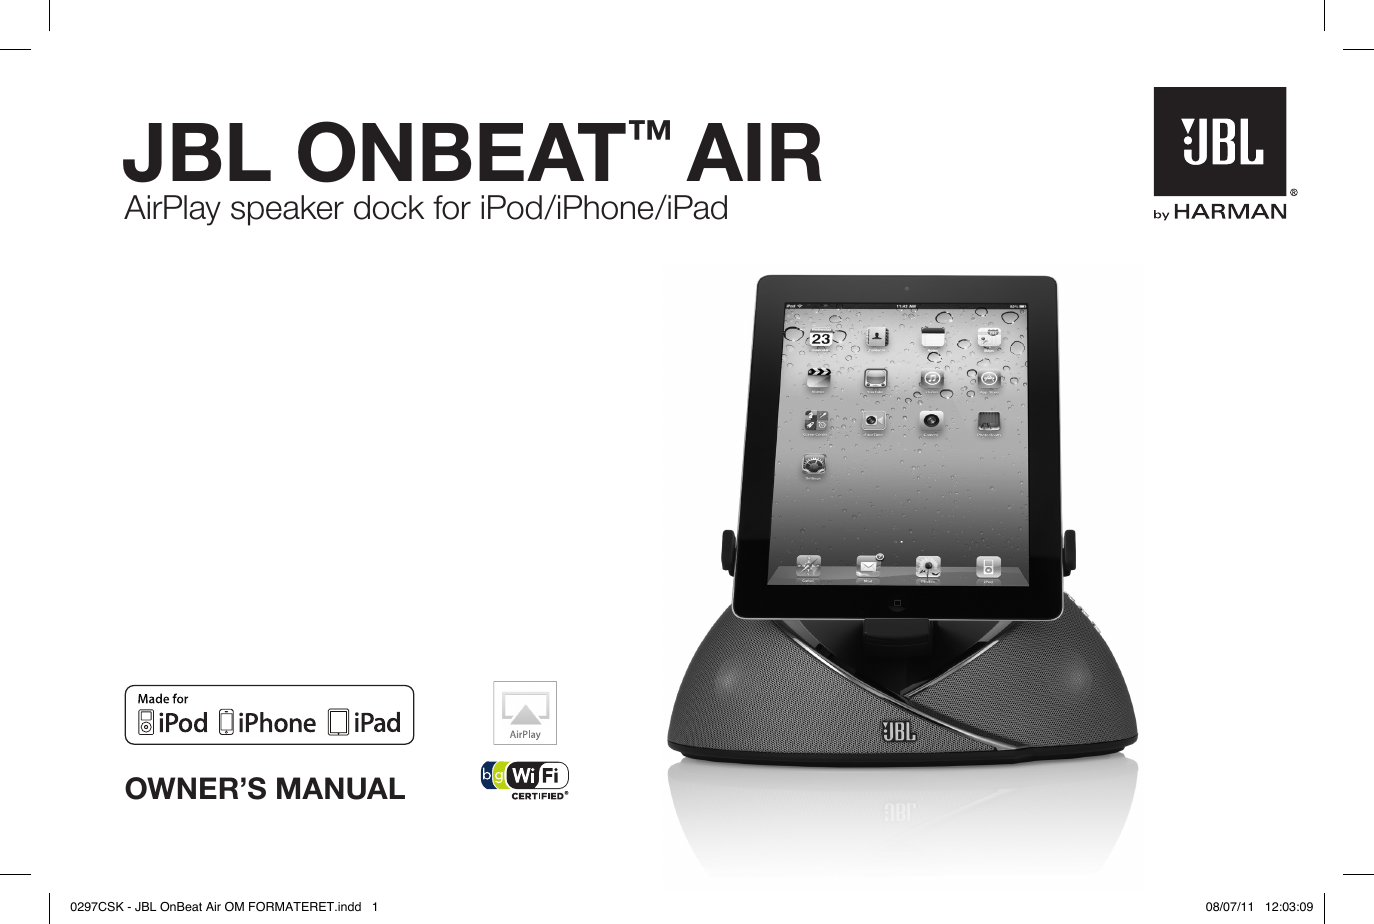 OWNER’S MANUALAirPlay speaker dock for iPod/iPhone/iPadJBL ONBEAT™ AIR0297CSK - JBL OnBeat Air OM FORMATERET.indd   1 08/07/11   12:03:09